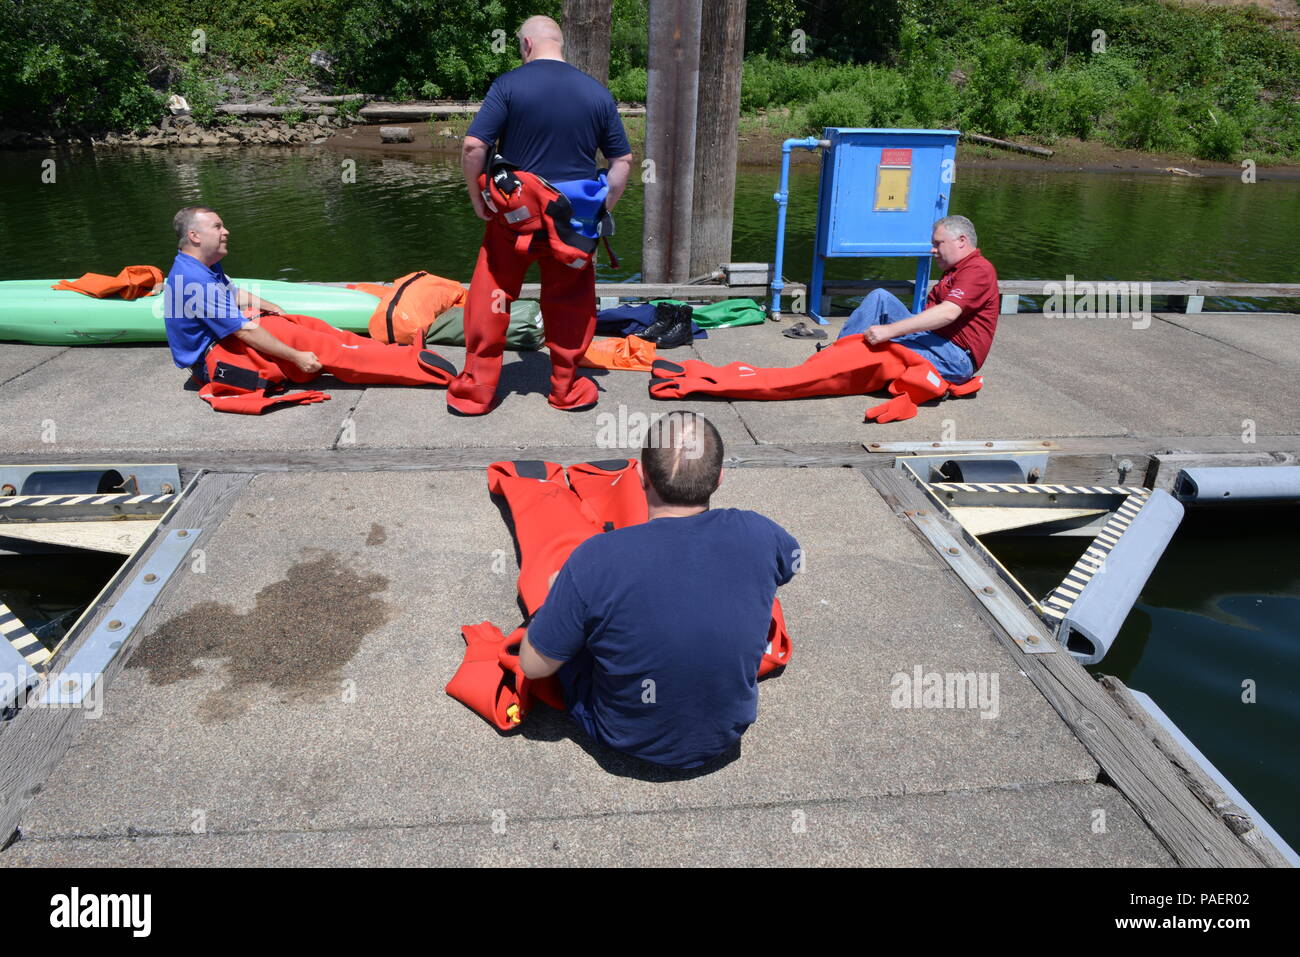 Members of the Washington Homeland Security Roundtable don immersion survival suits commonly known as gumby suits on the floating docks at Marine Safety Unit Portland on the shores of the Willamette River, July 16, 2018.    The WHSR is an organization made up of maritime industry executives and homeland security professionals from across the country.    U.S. Coast Guard photo by Petty Officer 3rd Class Trevor Lilburn. Stock Photo